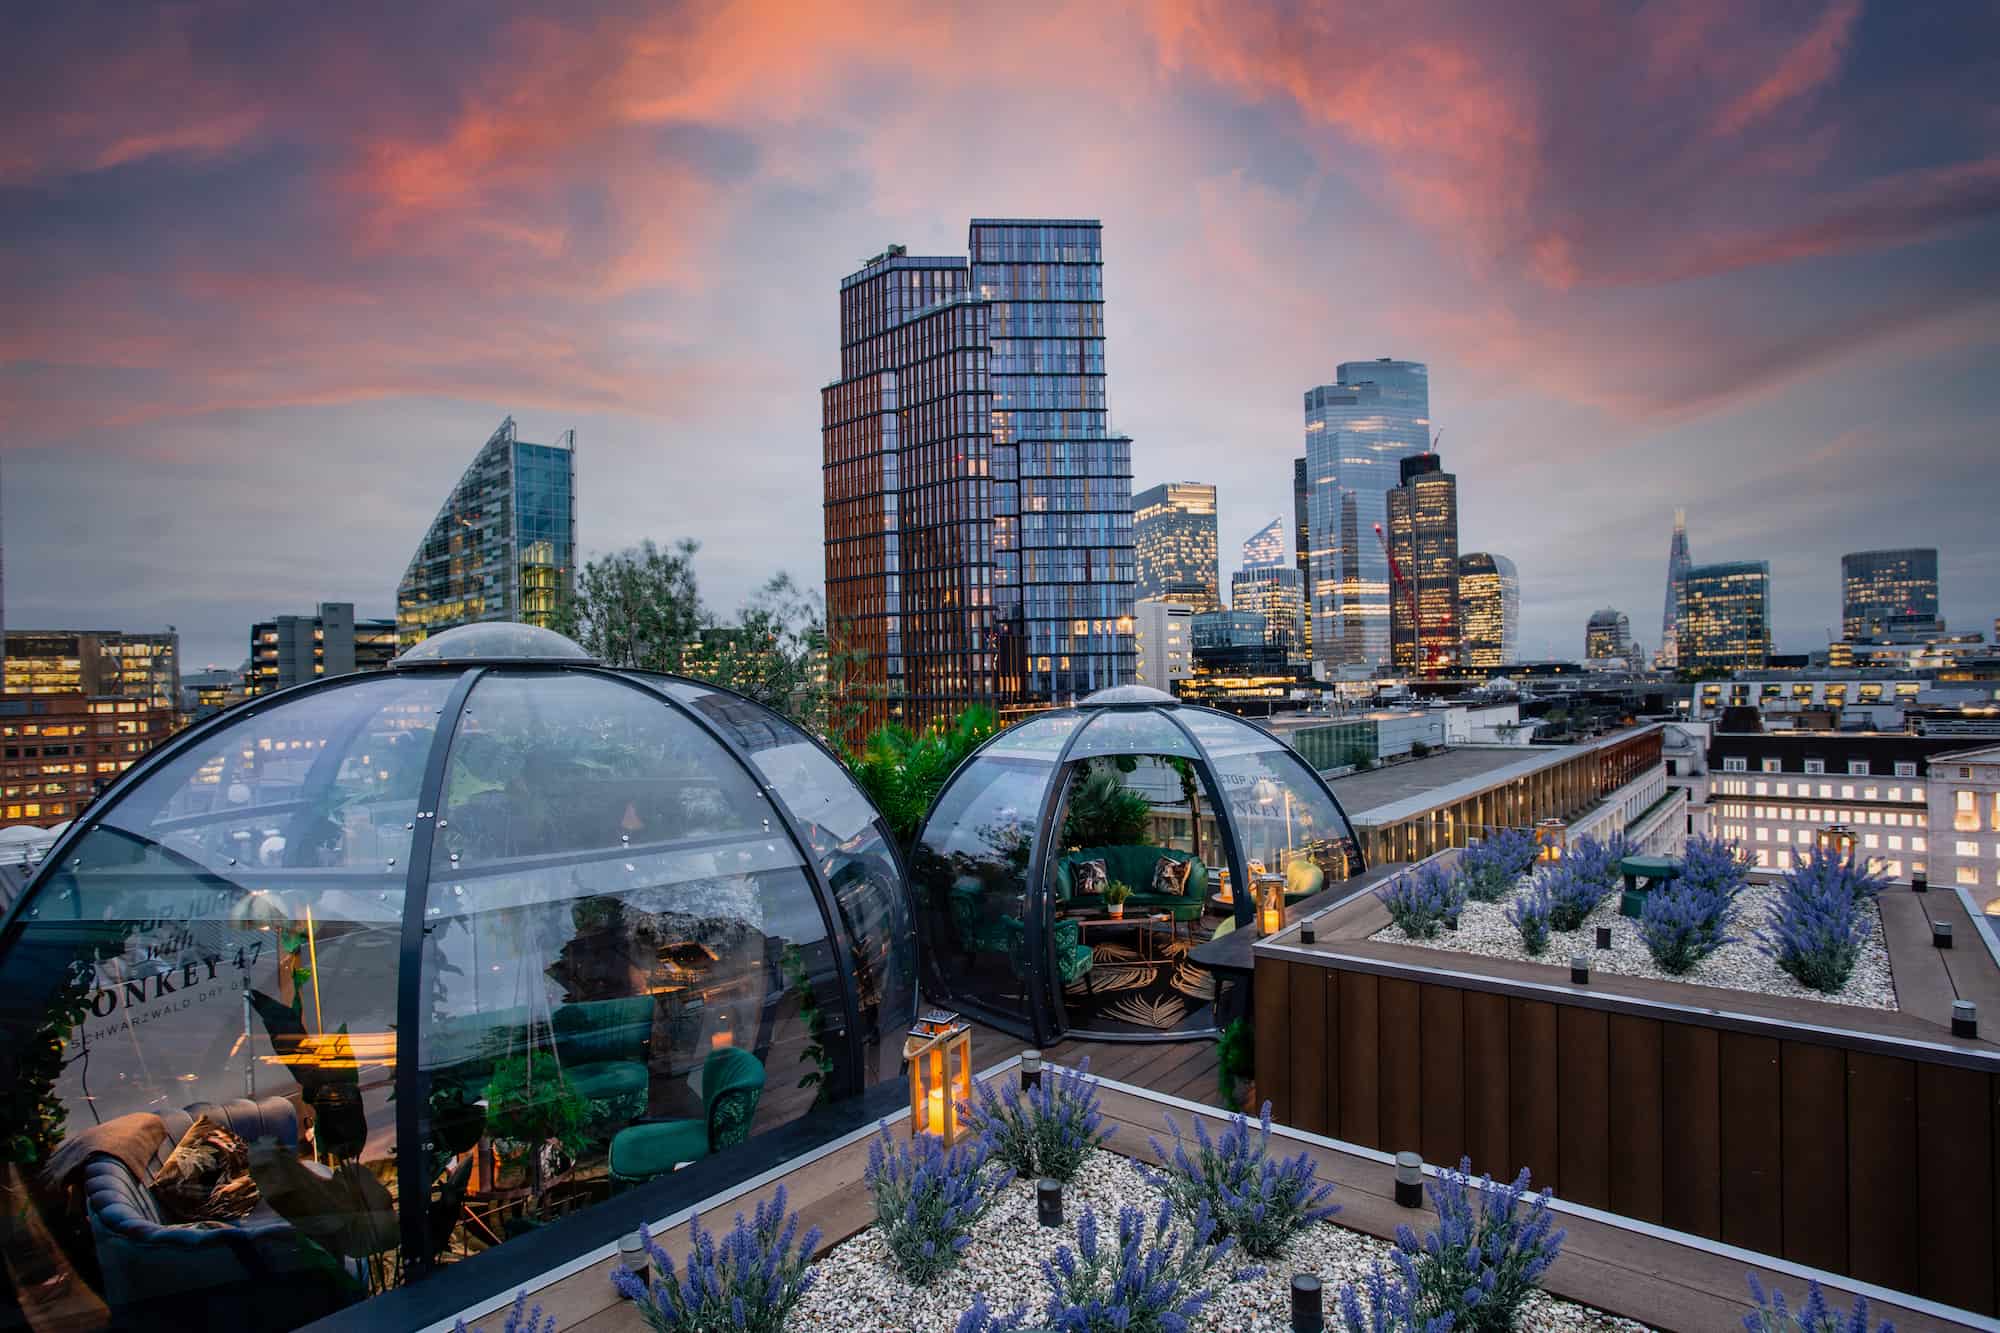 Aviary Rooftop Restaurant and Bar in United Kingdom, Europe  - Rated 3.5